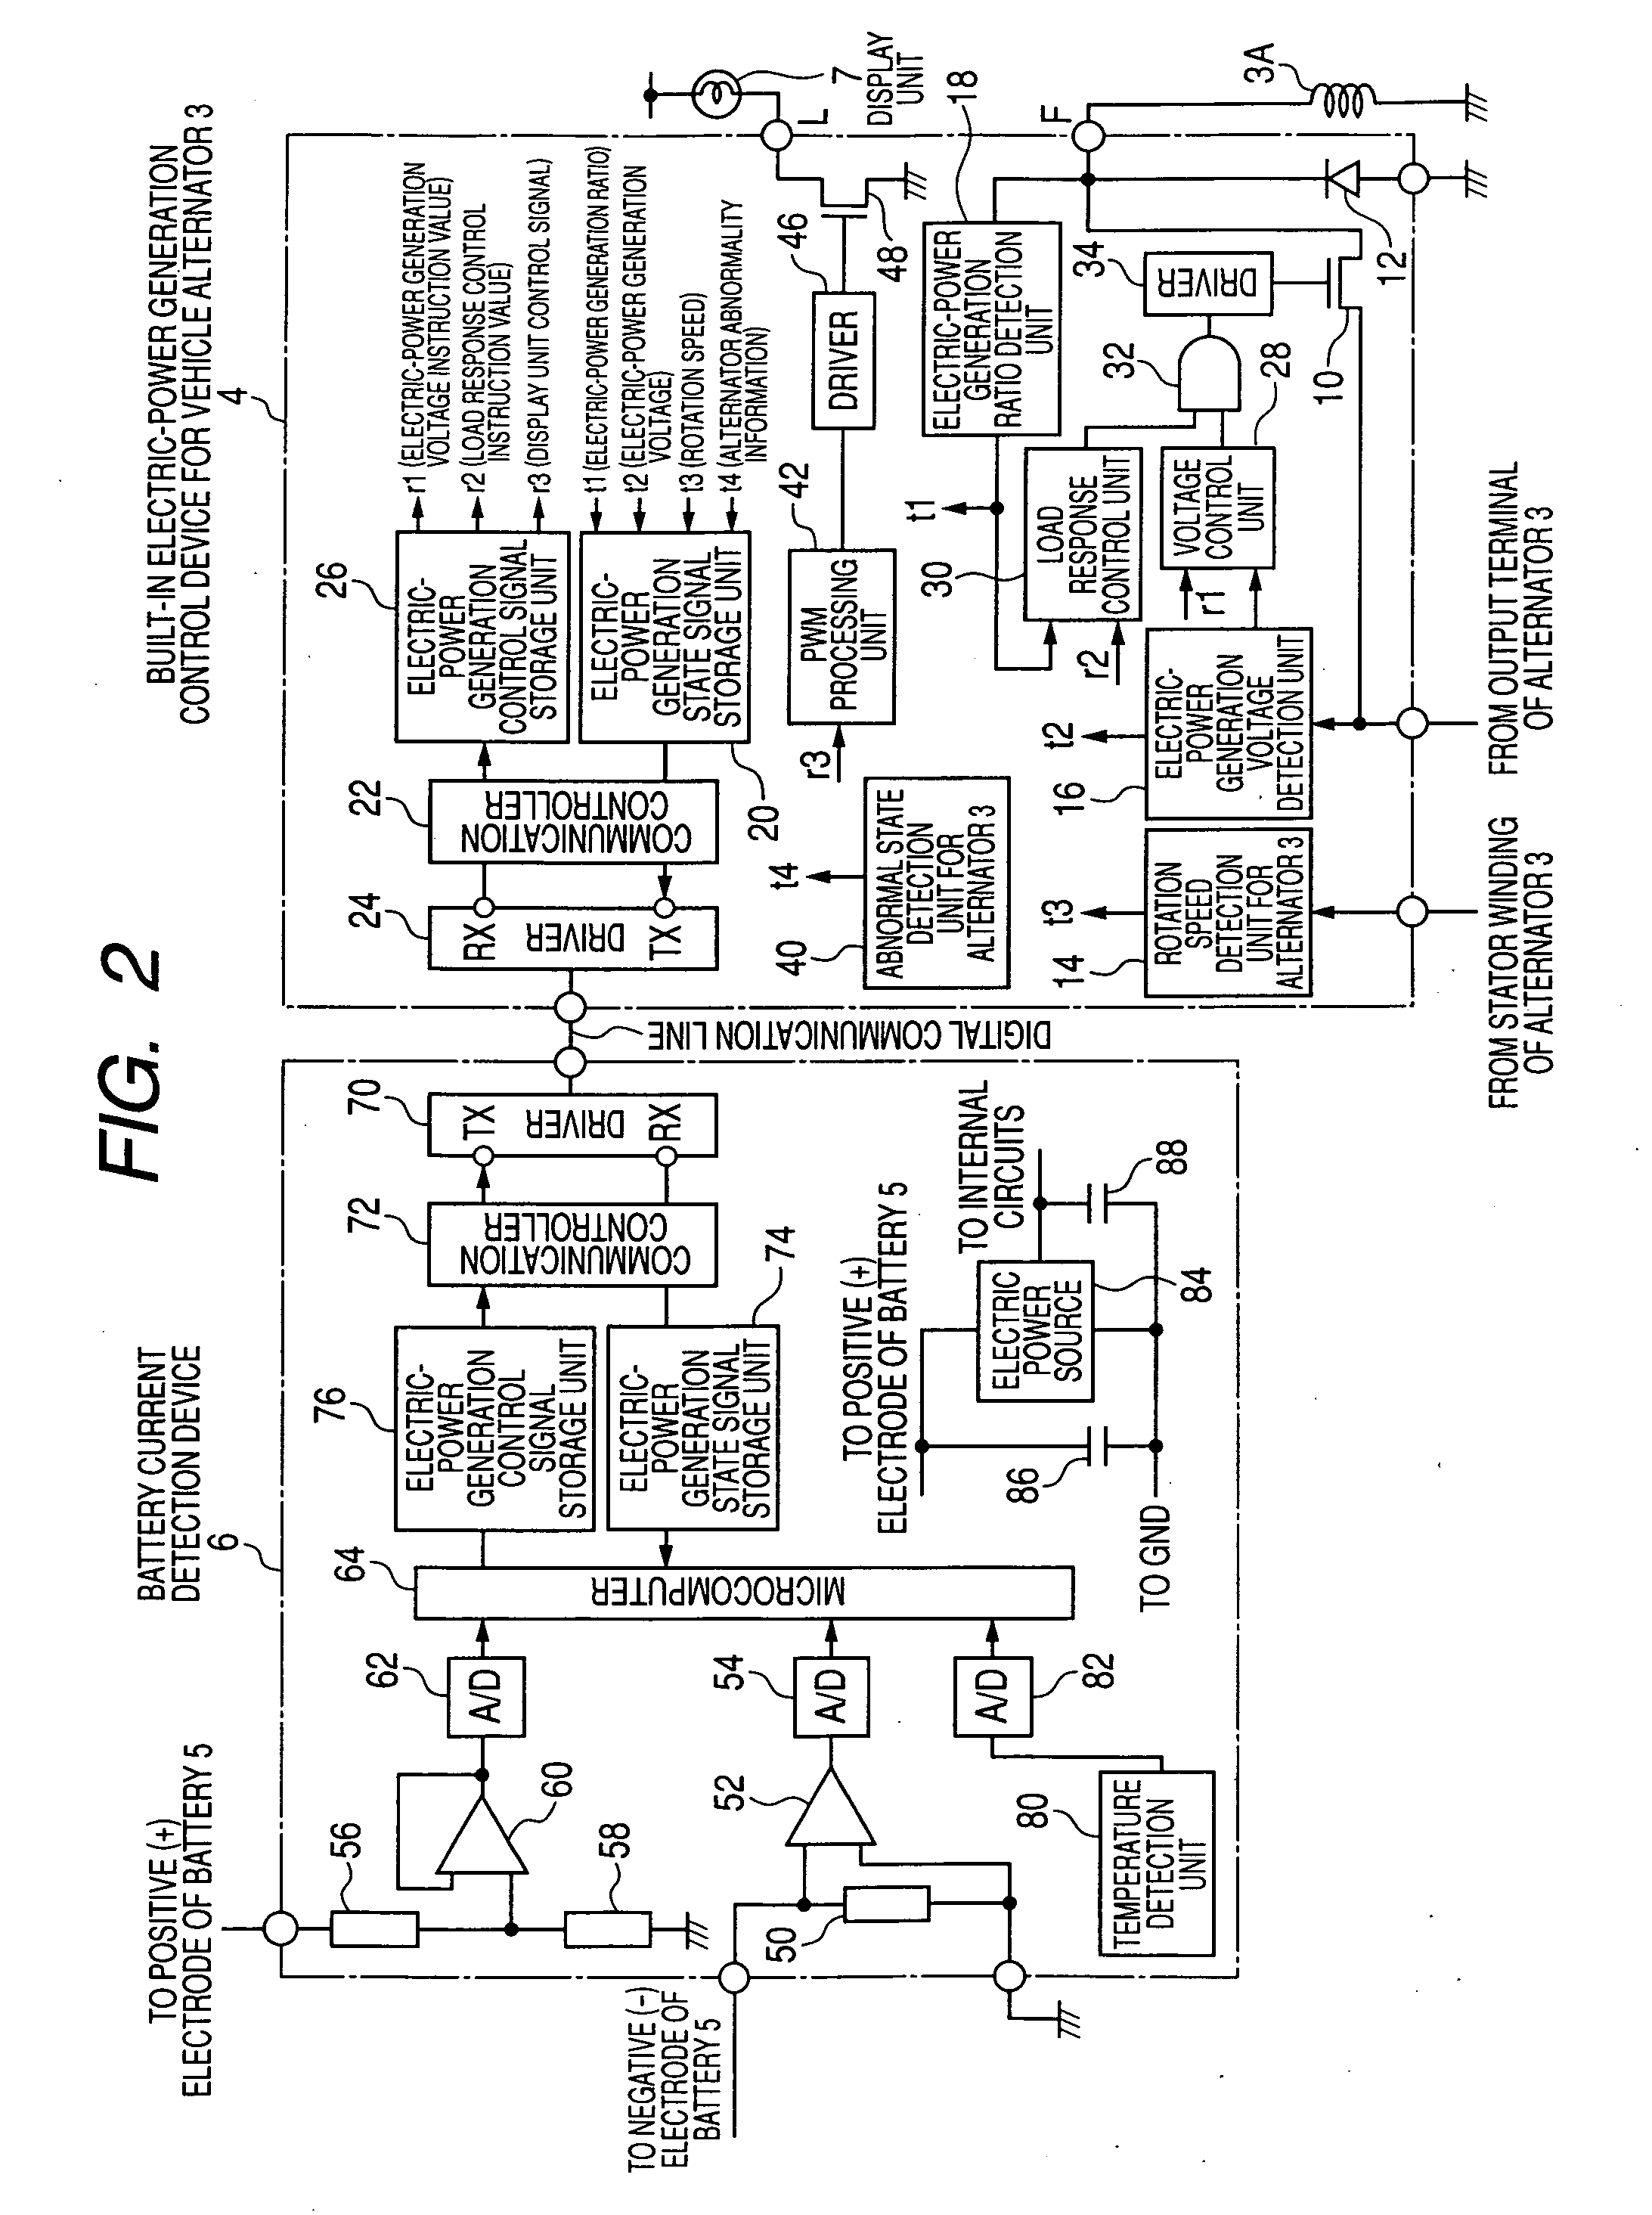 Vehicle control system capable of controlling electric-power generation state of vehicle alternator